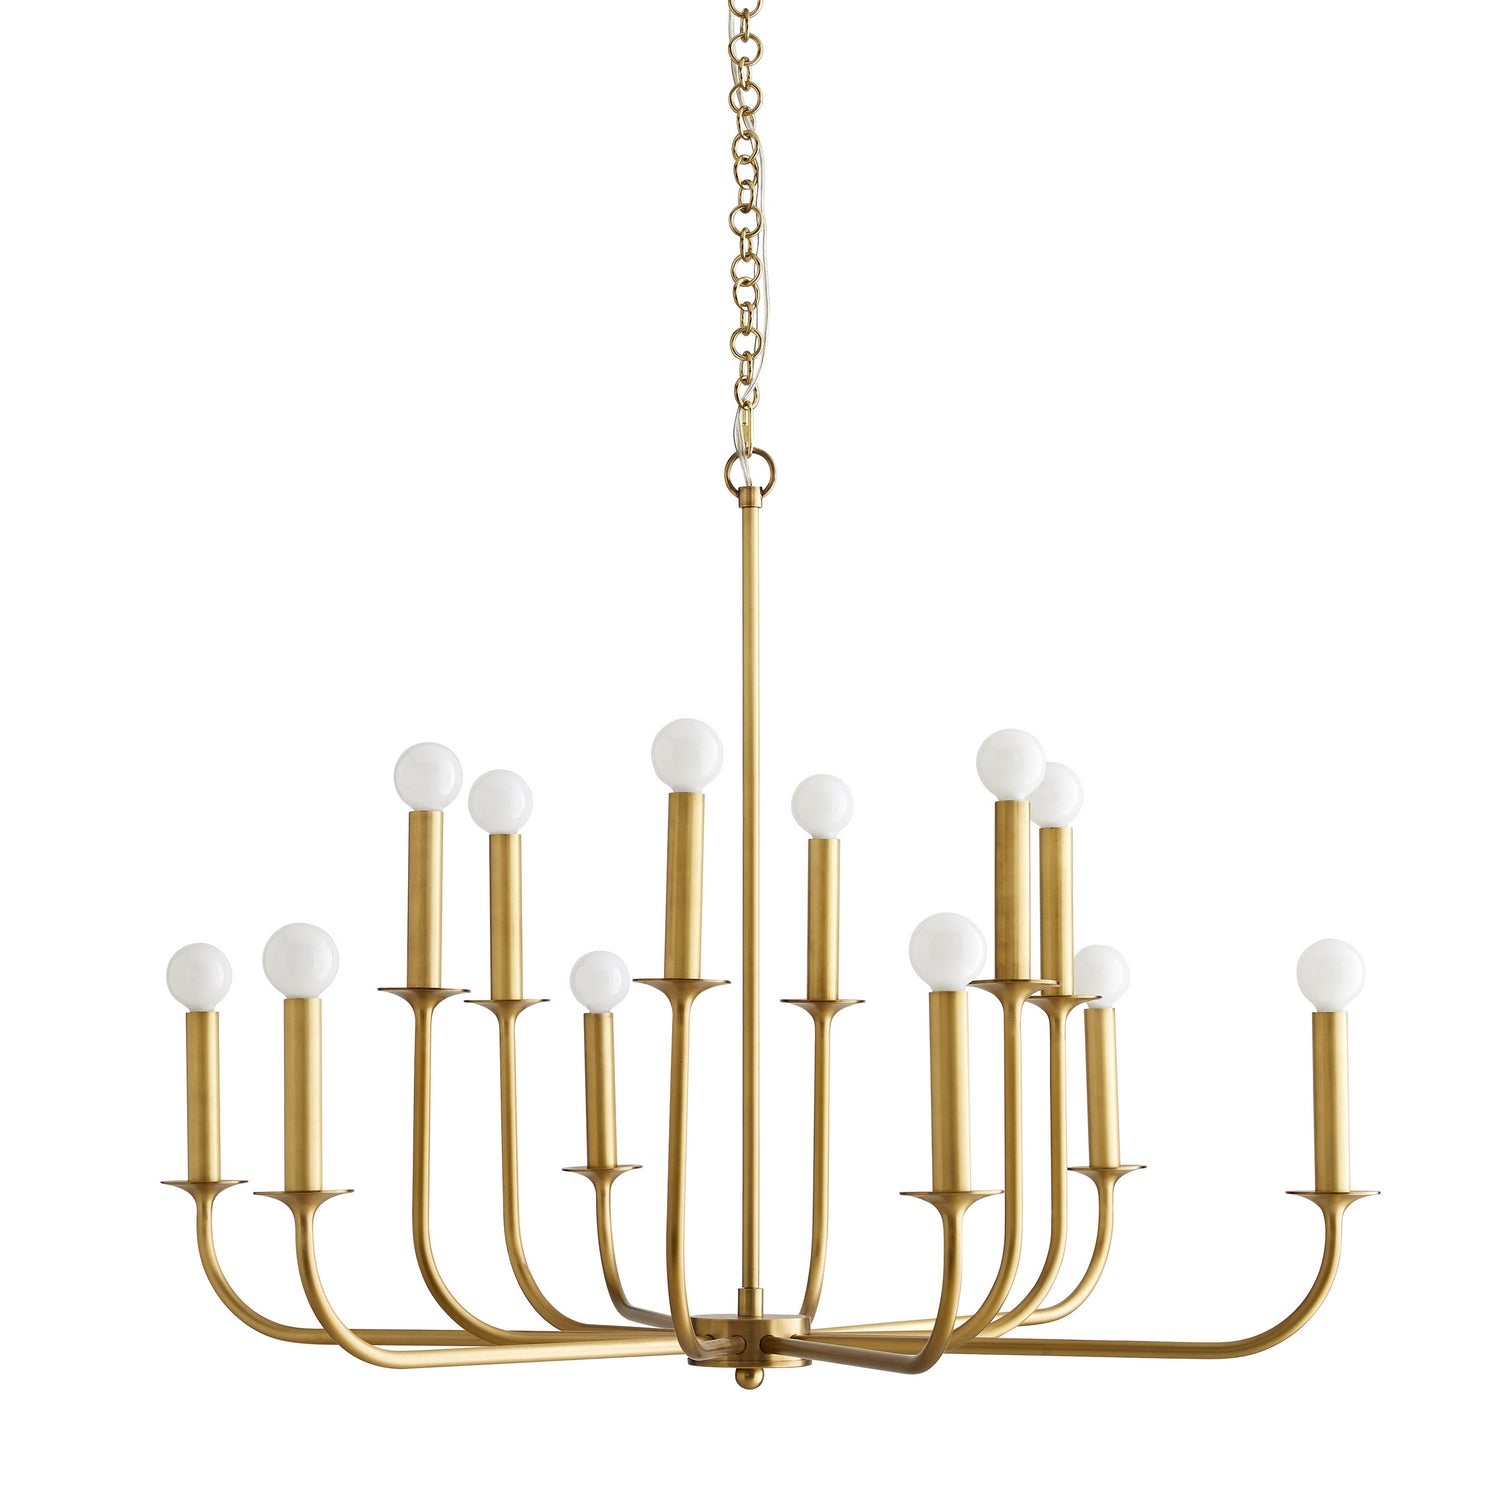 12 Light Chandelier from the Breck collection in Antique Brass finish